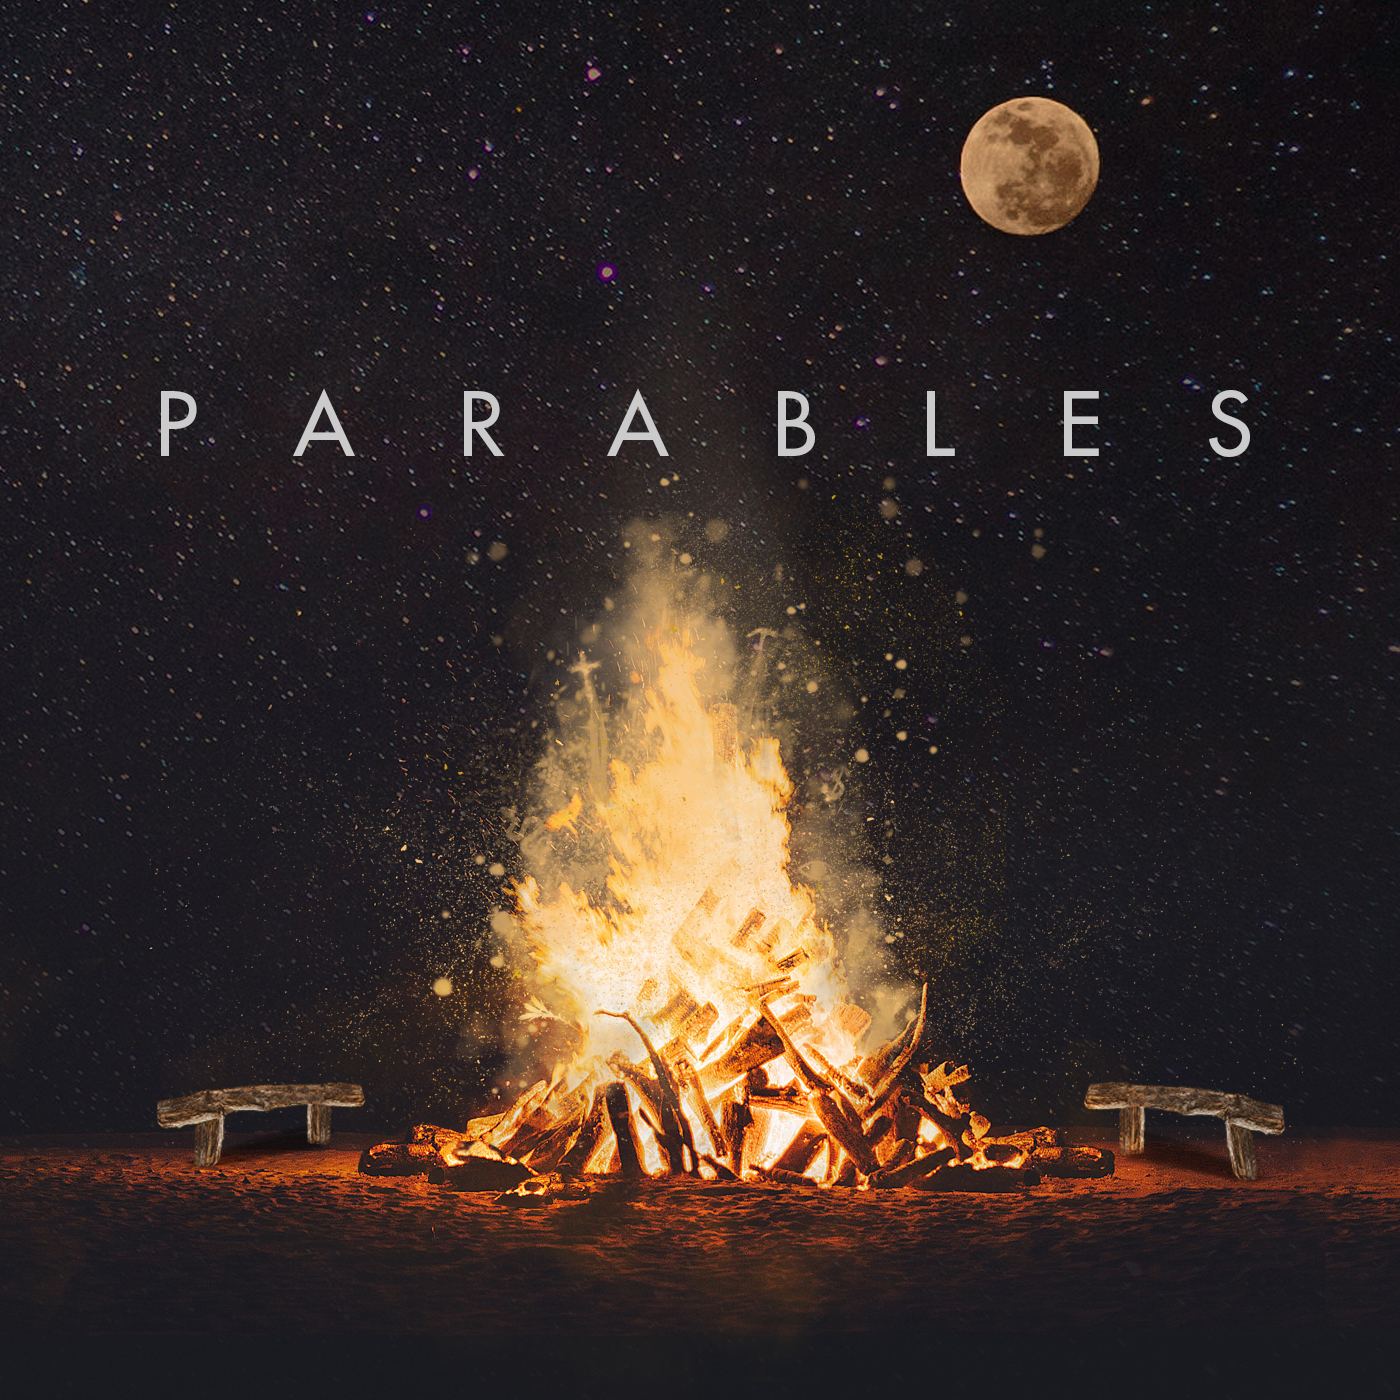 Parables - The Rich Man and Lazarus - Chris Wall - 10-13-2019